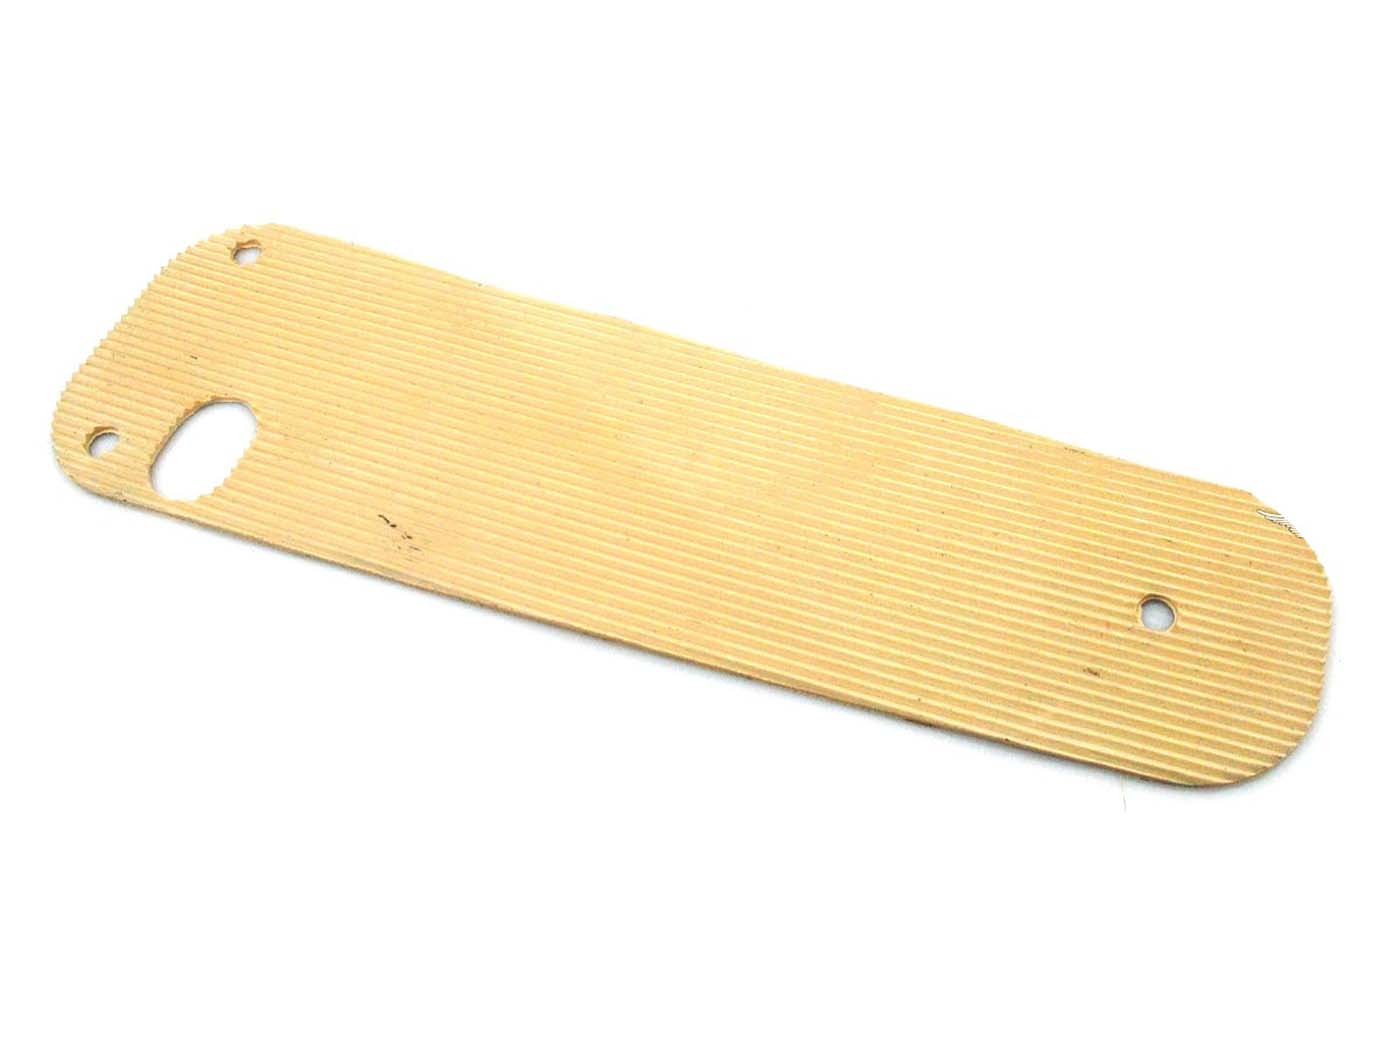 Fairing Footboard Rubber Ivory Right For Simson Schwalbe KR 51 1 + 2